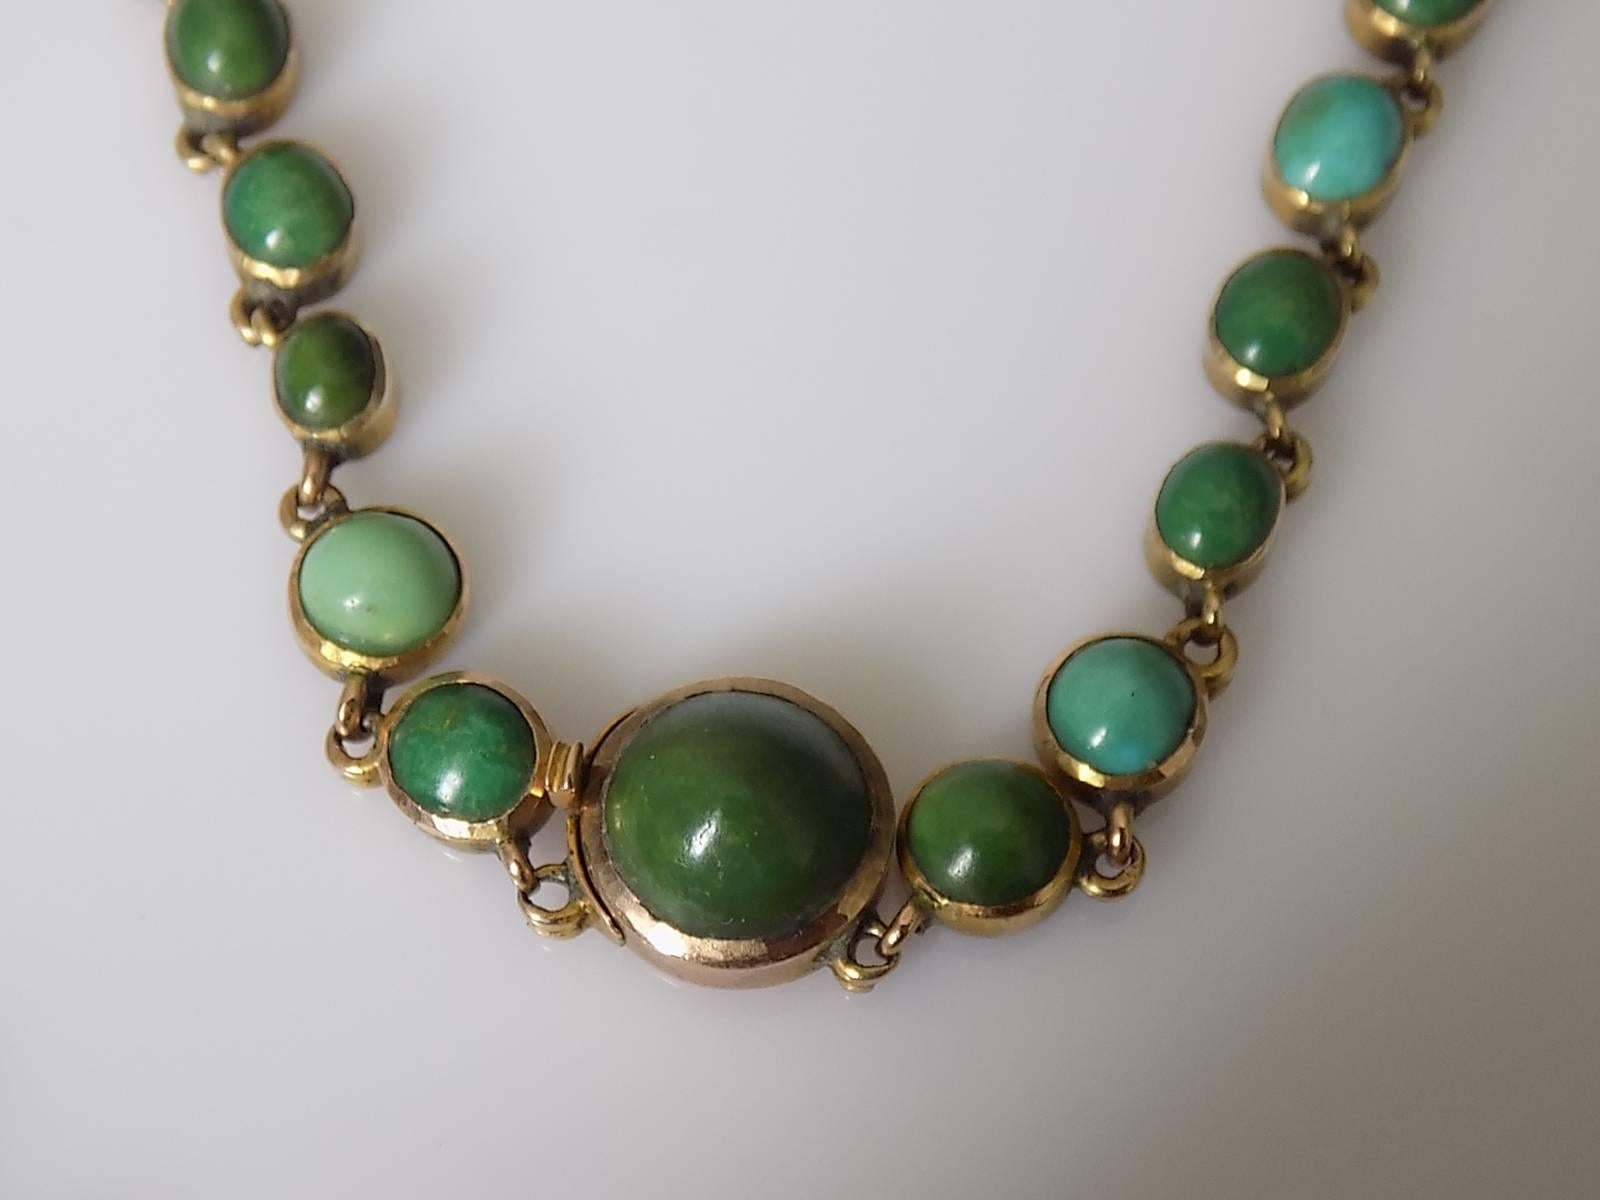 A Gorgeous Antique Victorian c.1860s 15 Carat Gold and Turquoise Riviere necklace. Turquoise mounted in open back setting. The color of Turquoise vary from light blue to dark green showing real charm and age of the necklace. English origin.
Length